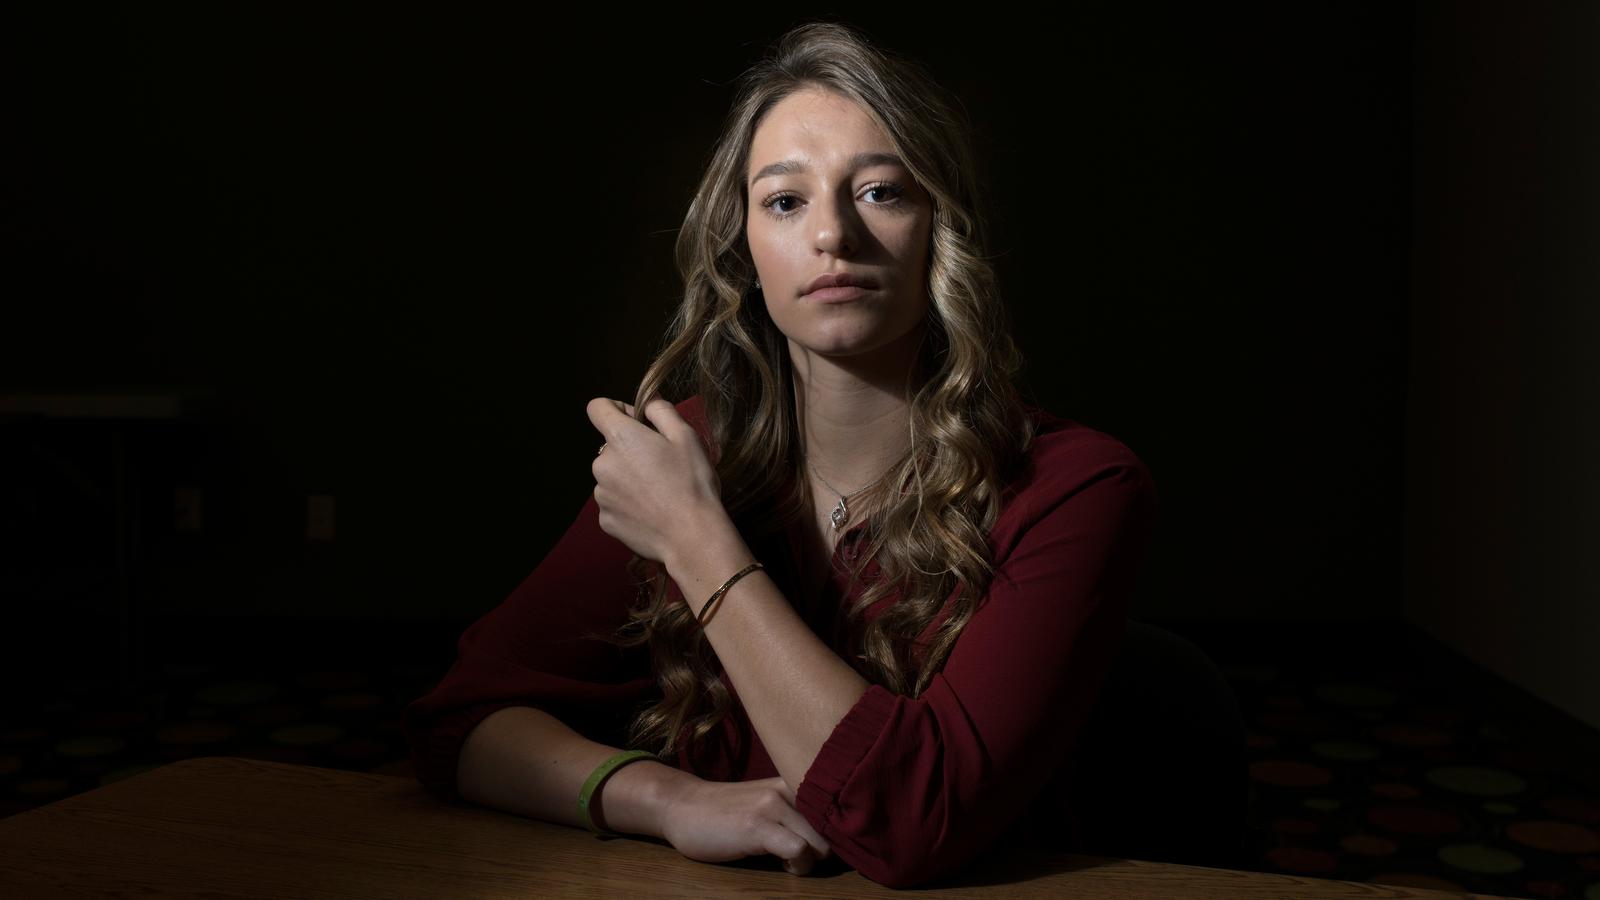 Izzy Hutchins, 19, said training at John Geddert’s gym was the “darkest time” of her life. Her mother, Lisa, gave her the metal bracelet seen on her left arm shortly before Izzy spoke at Nassar’s sentencing. The inscription reads, “She believed she could, so she did.”